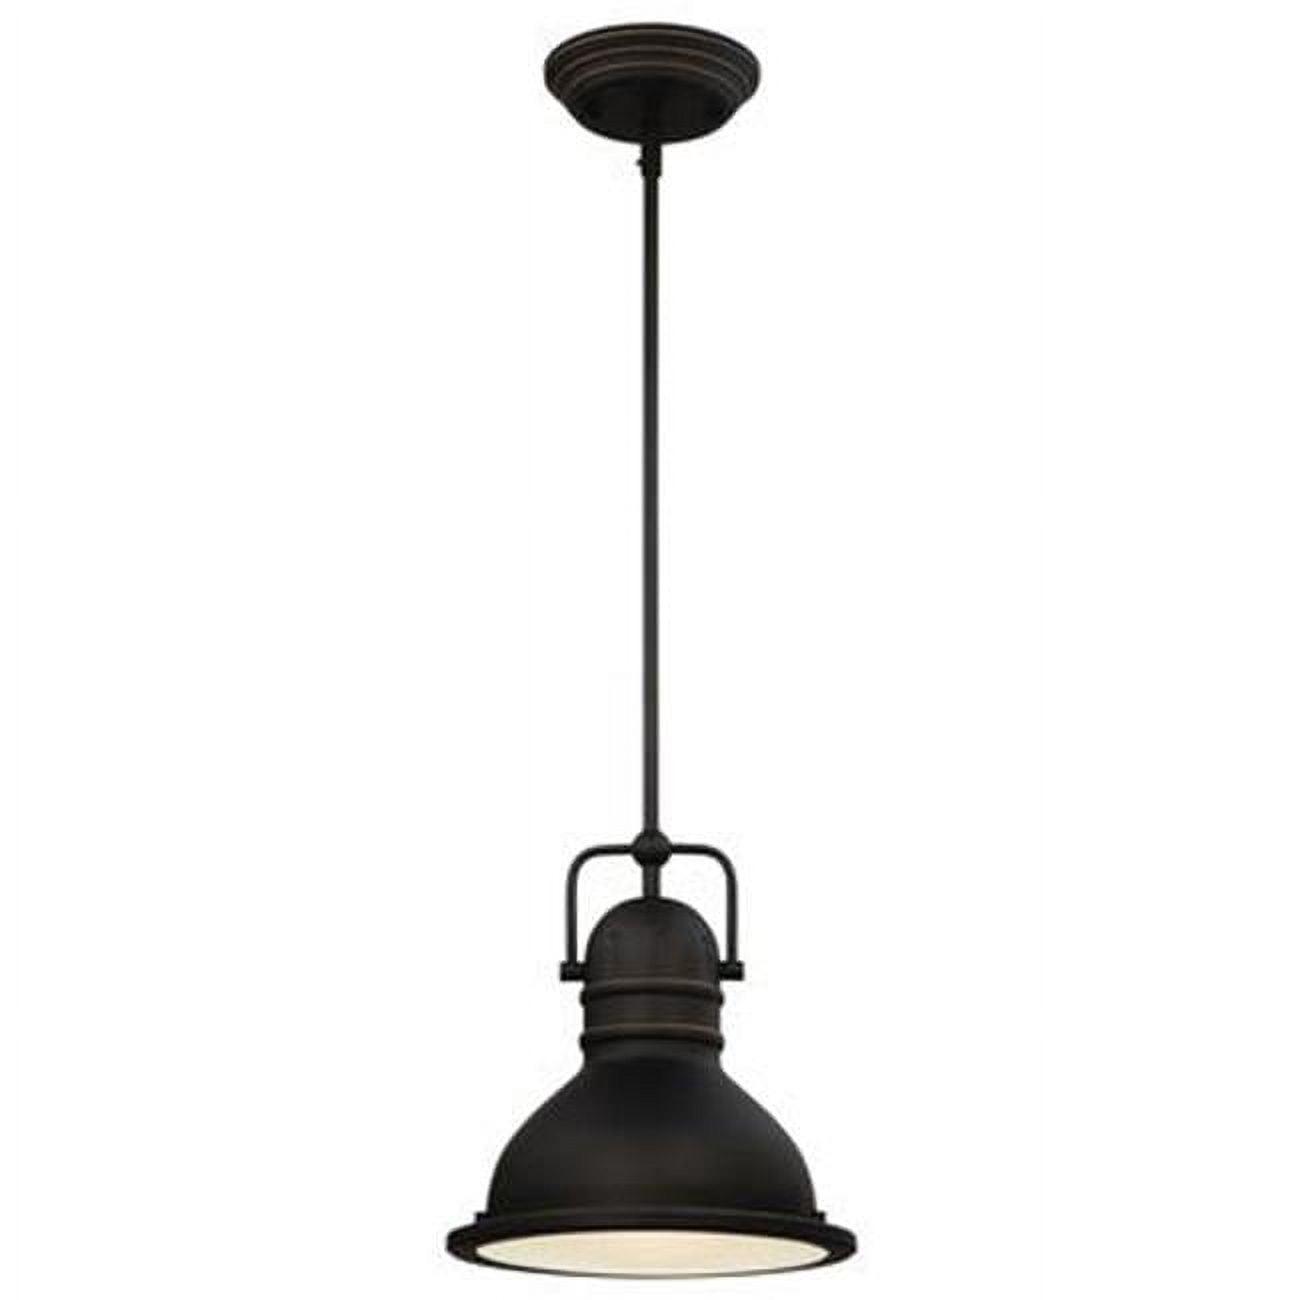 Farmhouse-Inspired Boswell Adjustable LED Pendant in Oil Rubbed Bronze